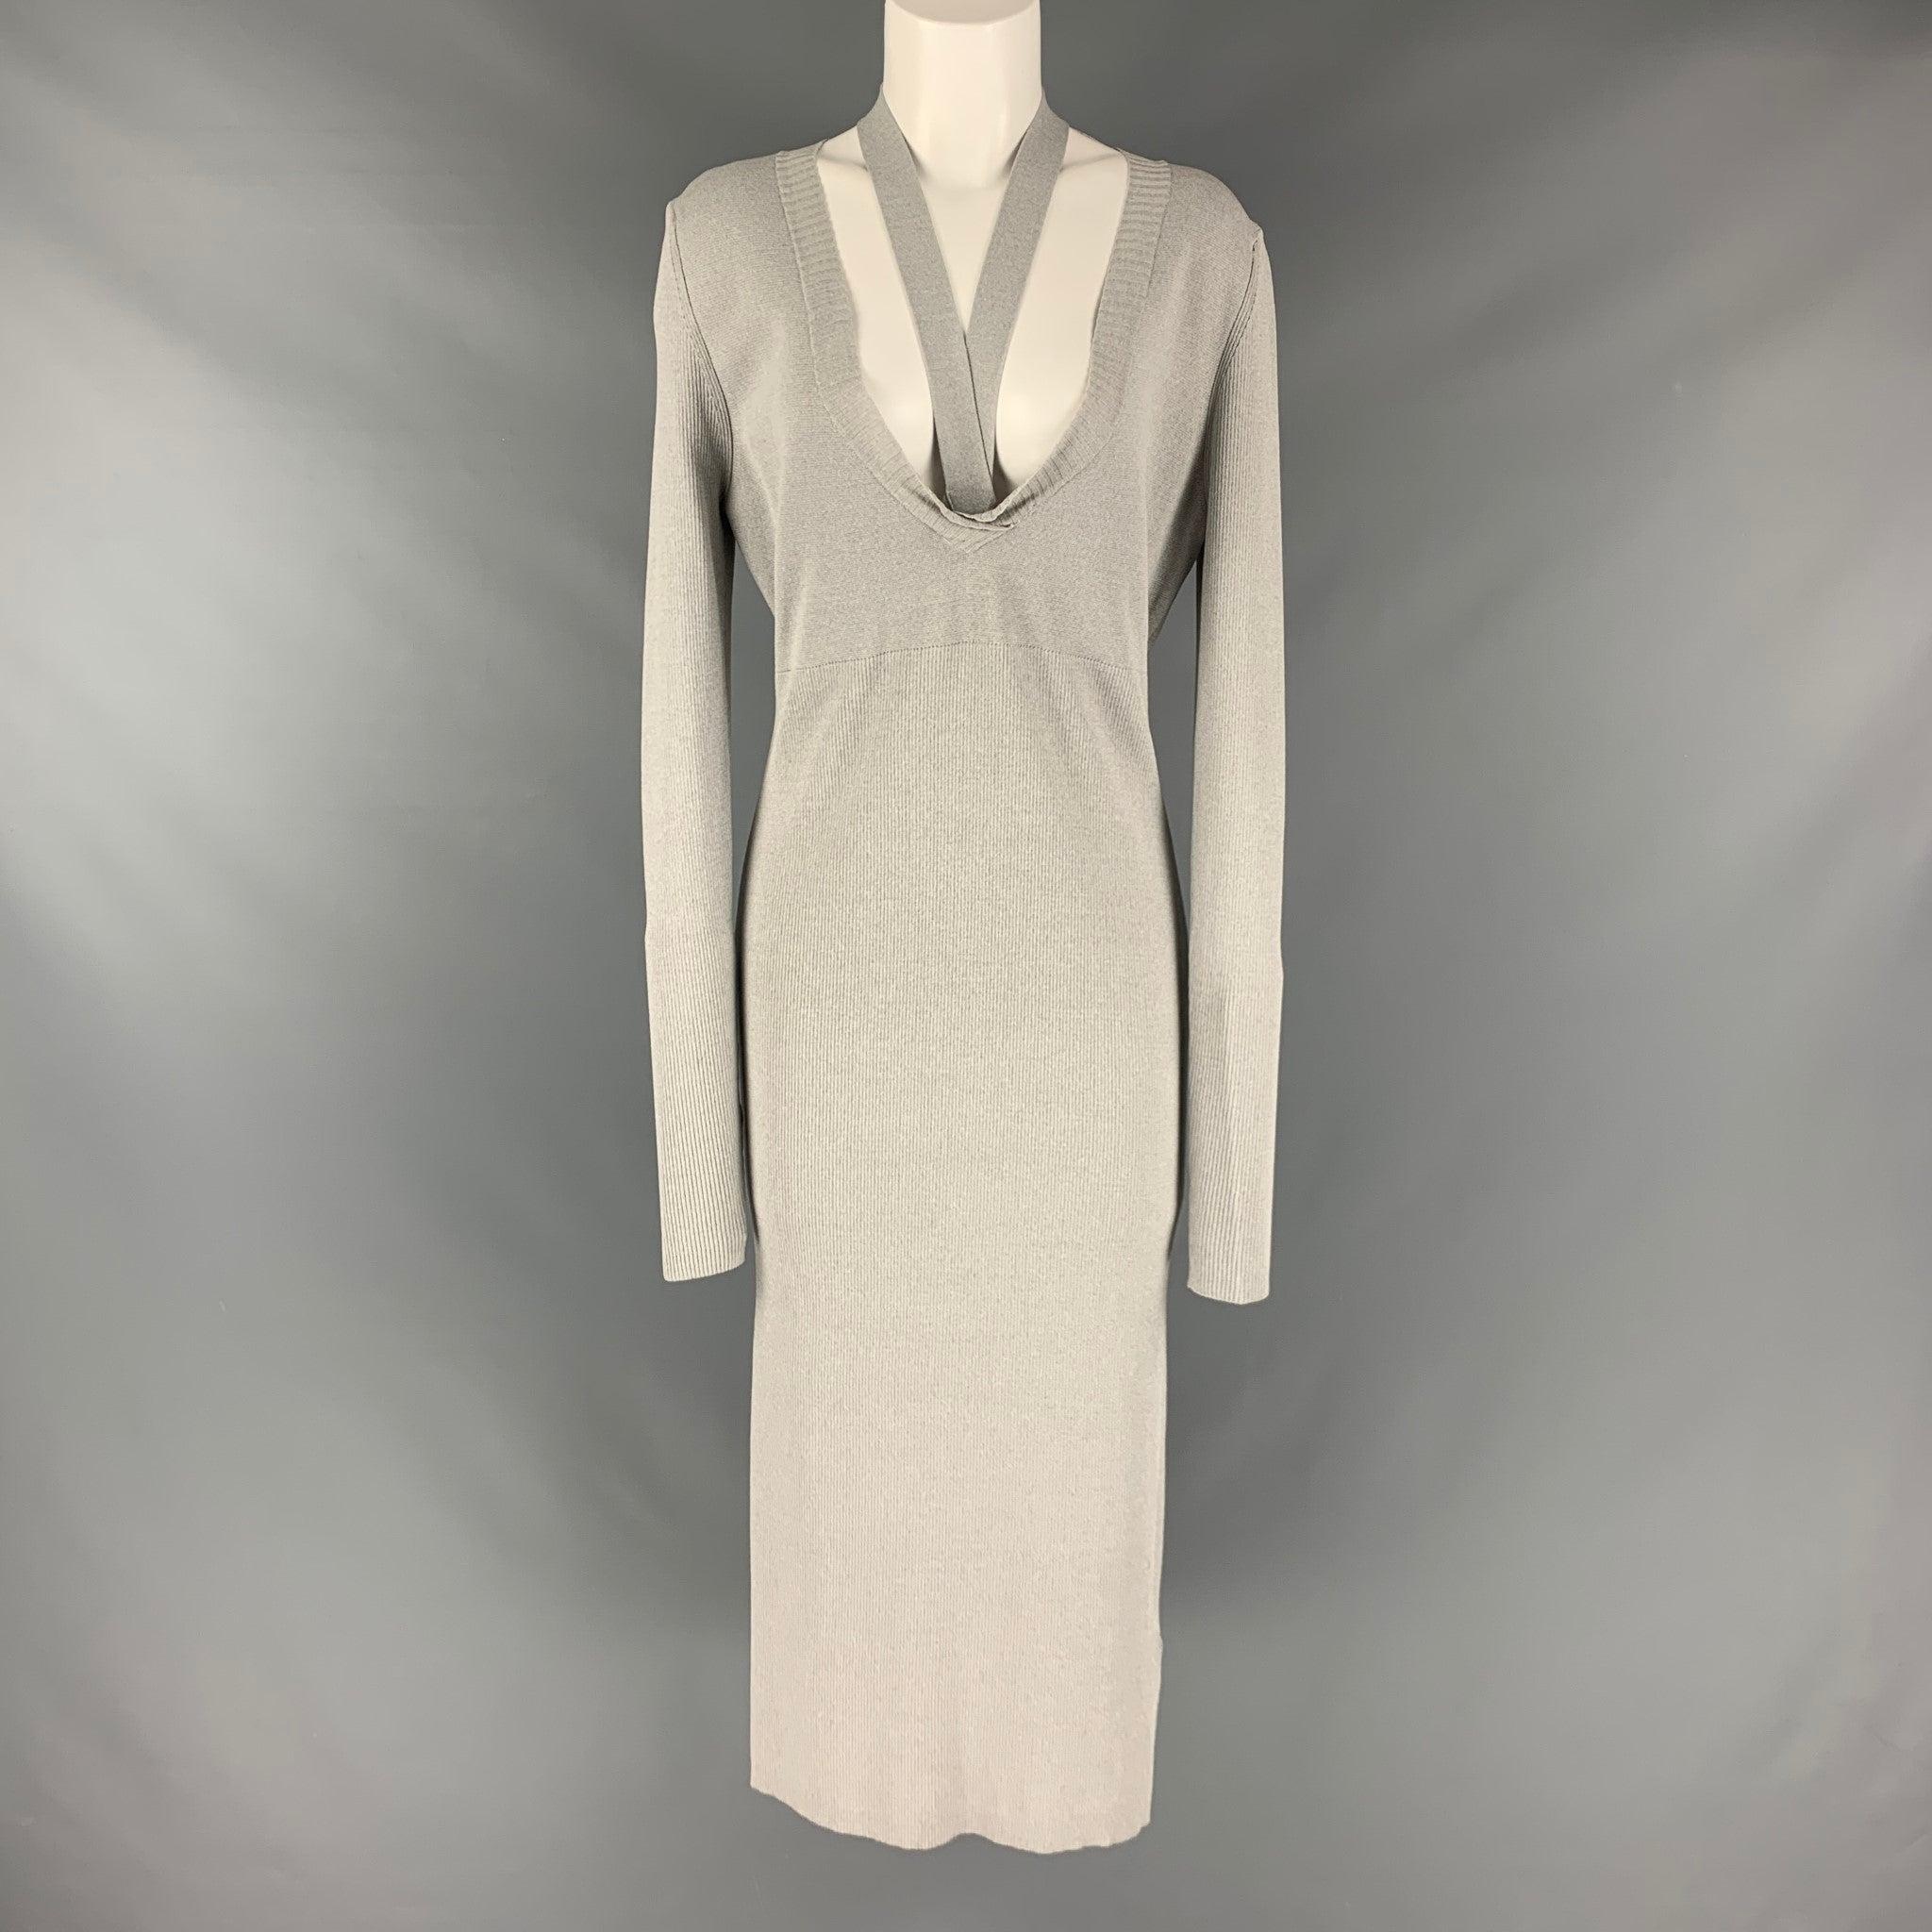 DION LEE dress in a grey viscose blend knit material featuring a v-neck, stretchy form-fitting look, ribbed texture, and mid-calf length.Very Good Pre-Owned Condition. Minor signs of wear. 

Marked:  8 

Measurements: 
 
Shoulder: 16.5 inches